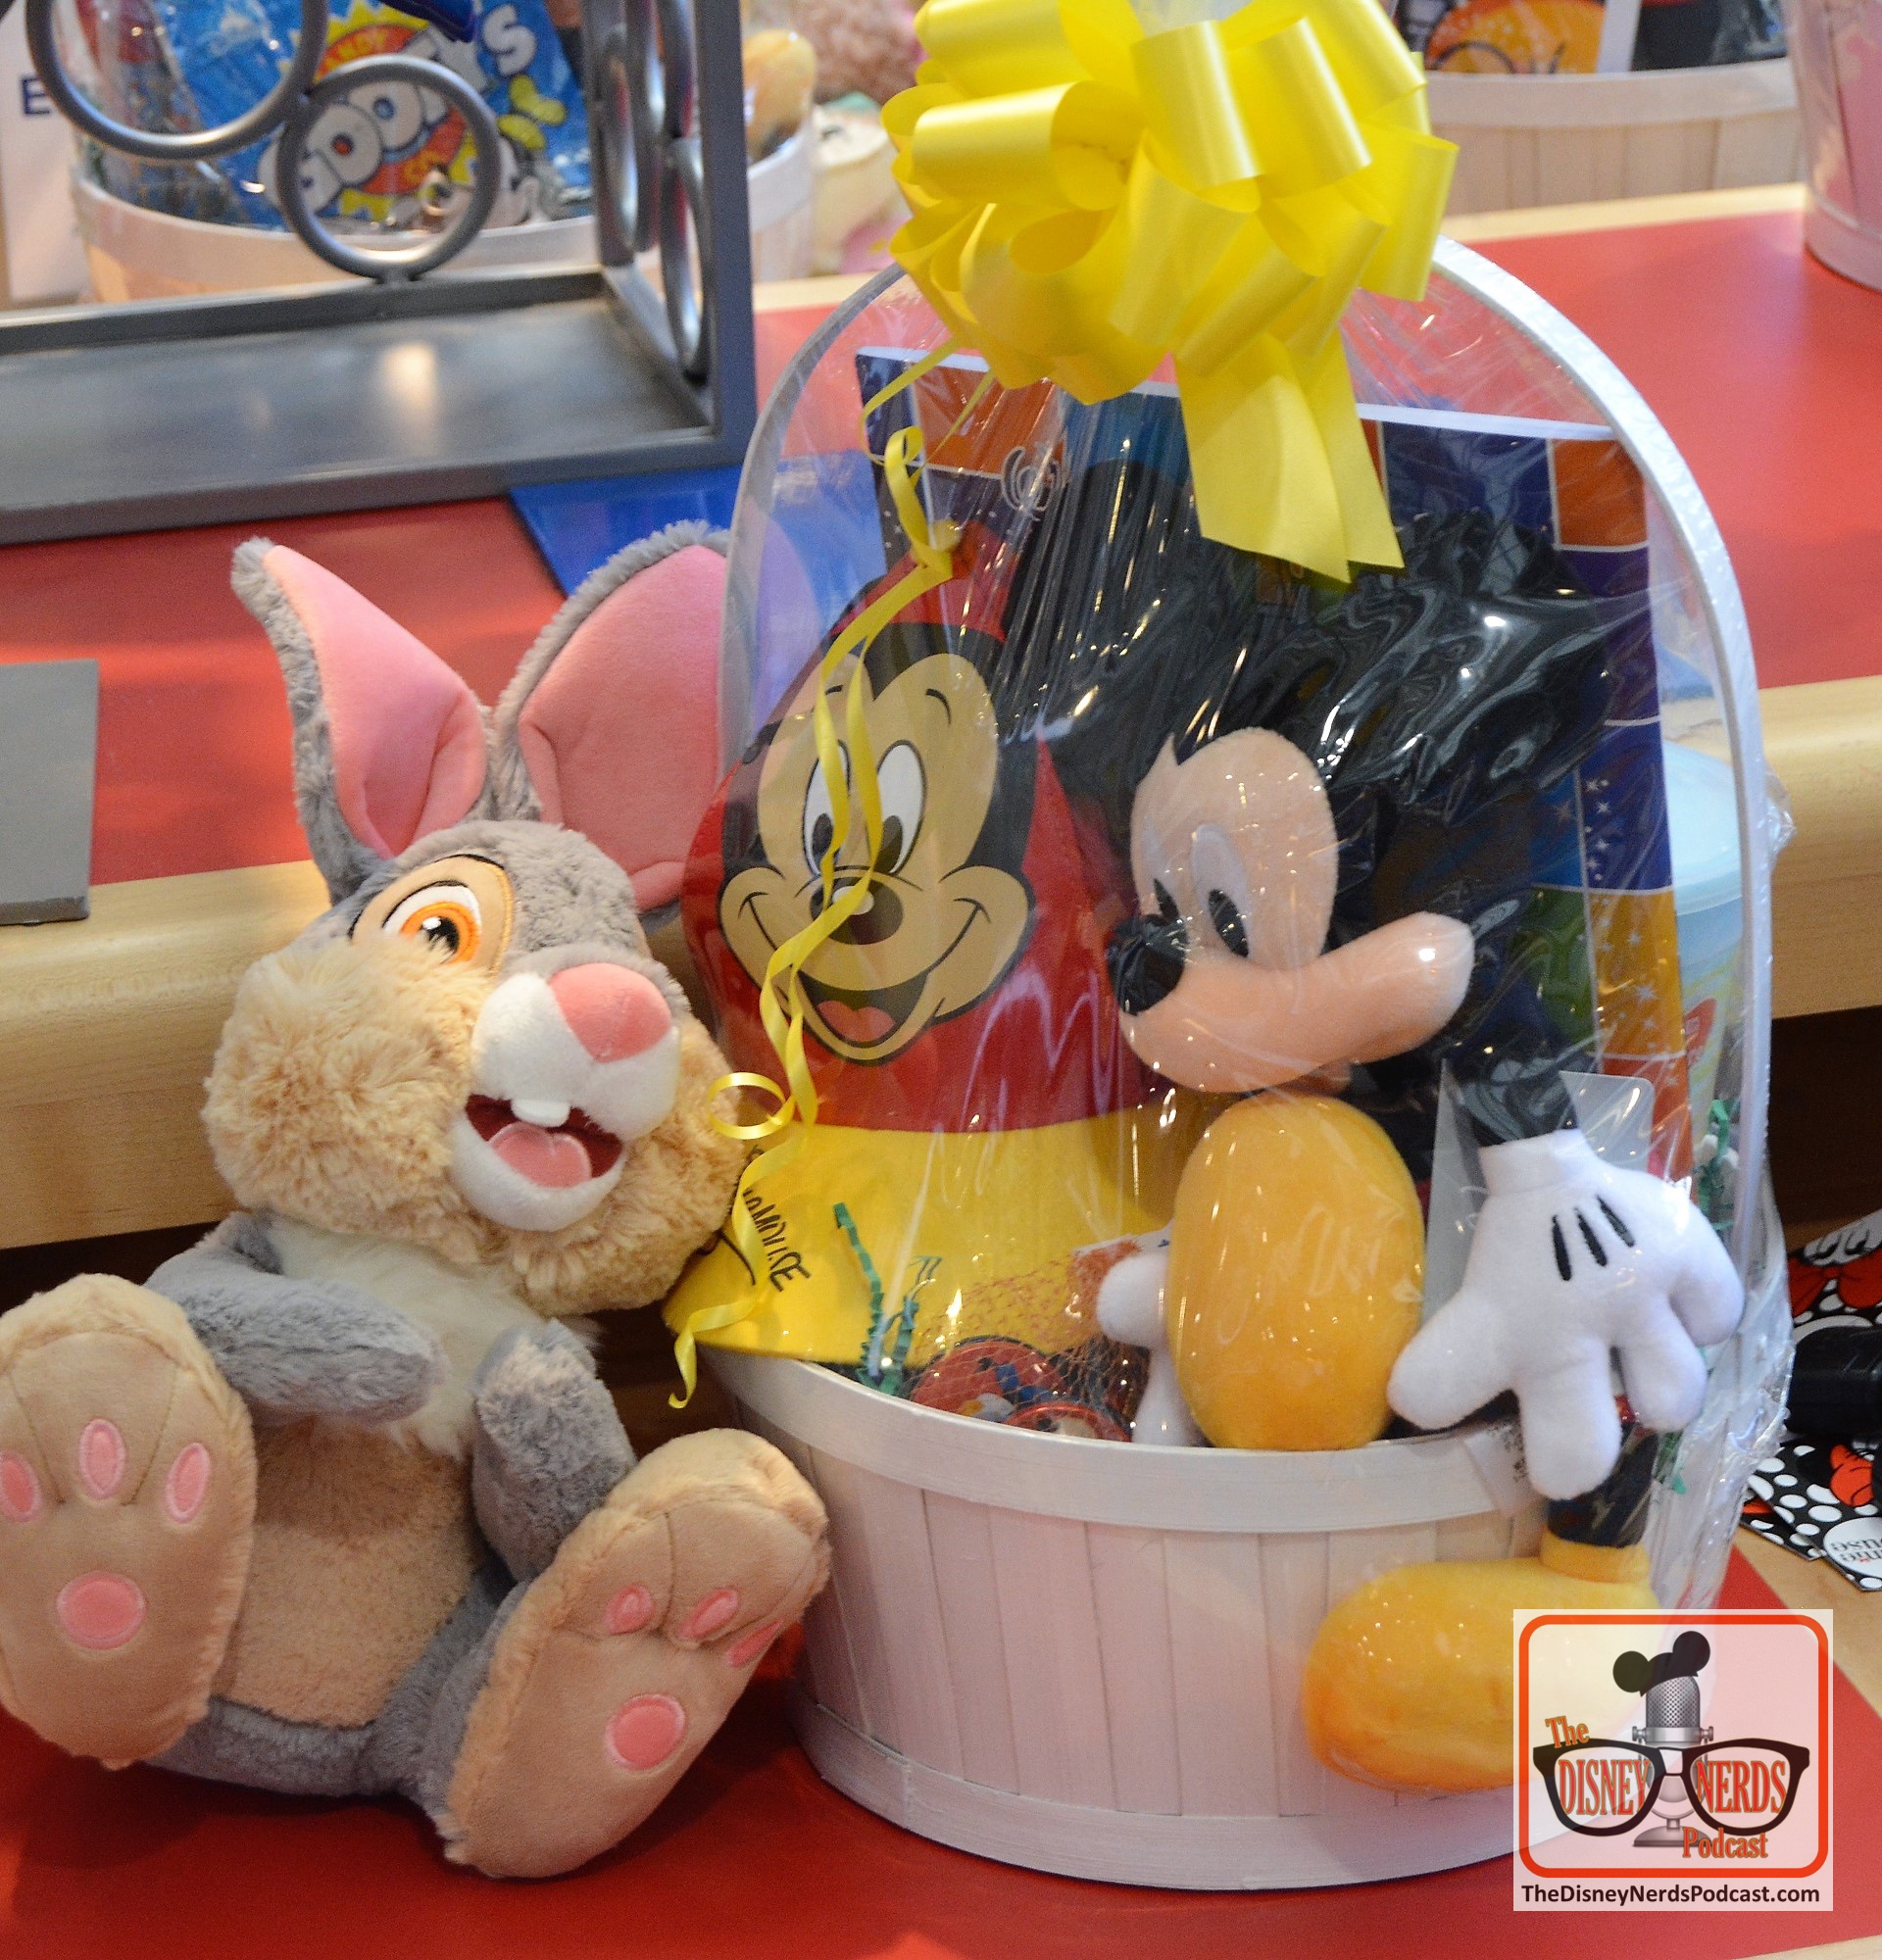 All around Walt Disney World Parks and Resorts you can create your own custom Easter Basket or Tote - These examples available at the contemporary resort.